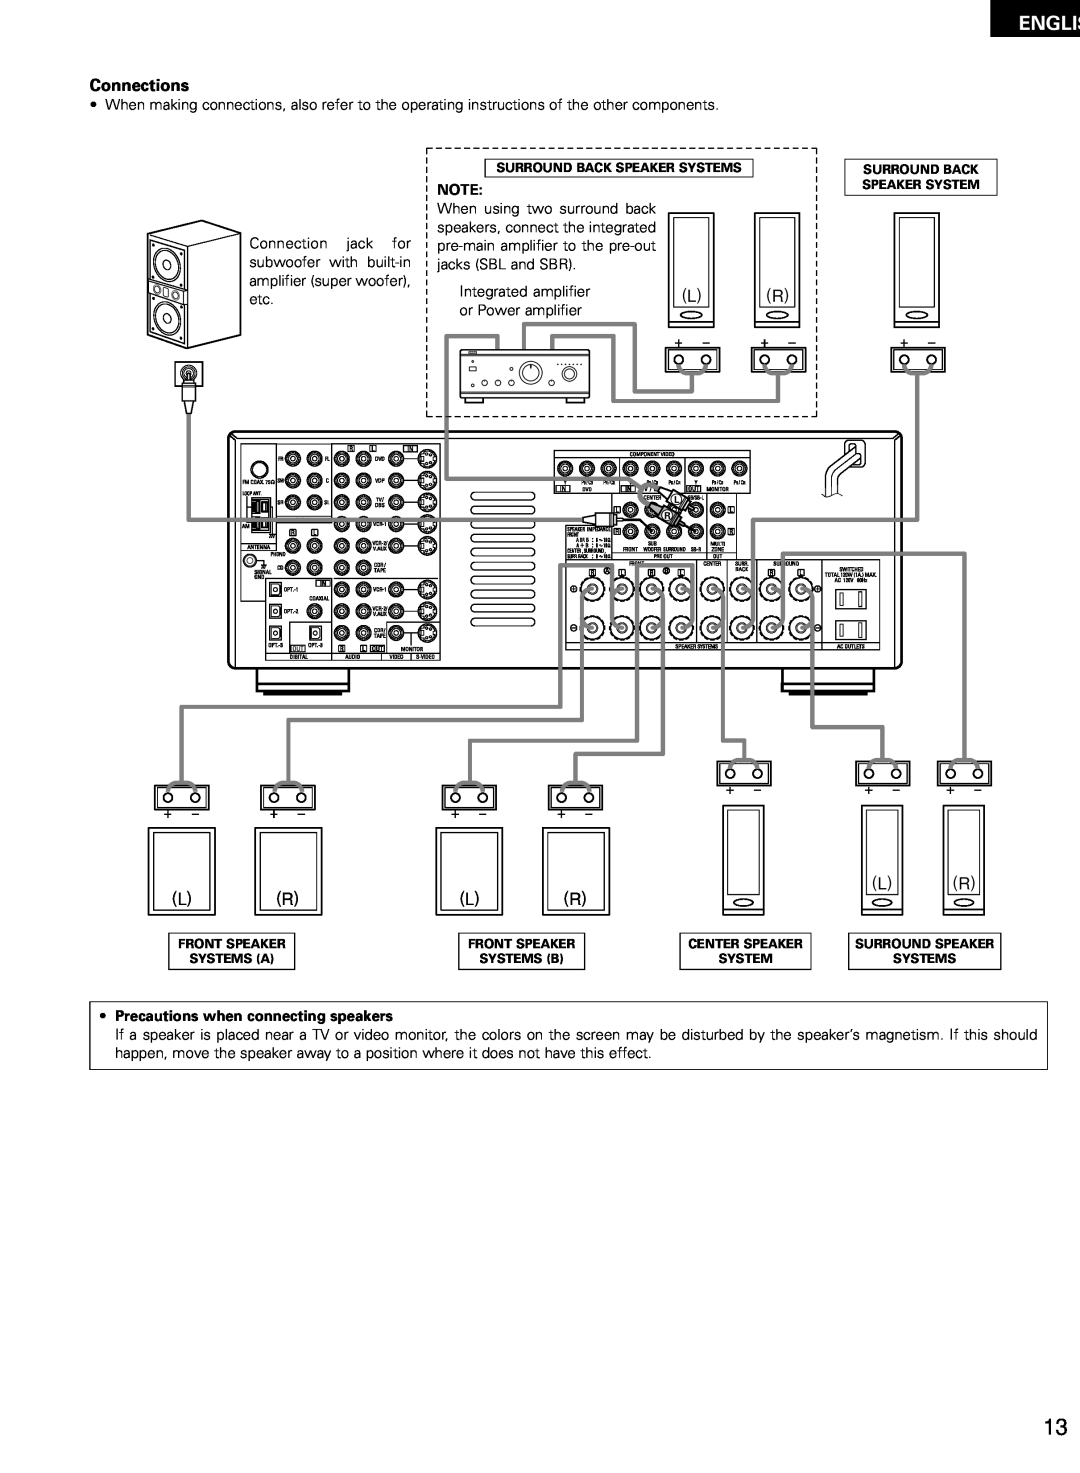 Denon AVR-2802/982 operating instructions Connections, Englis, Precautions when connecting speakers 